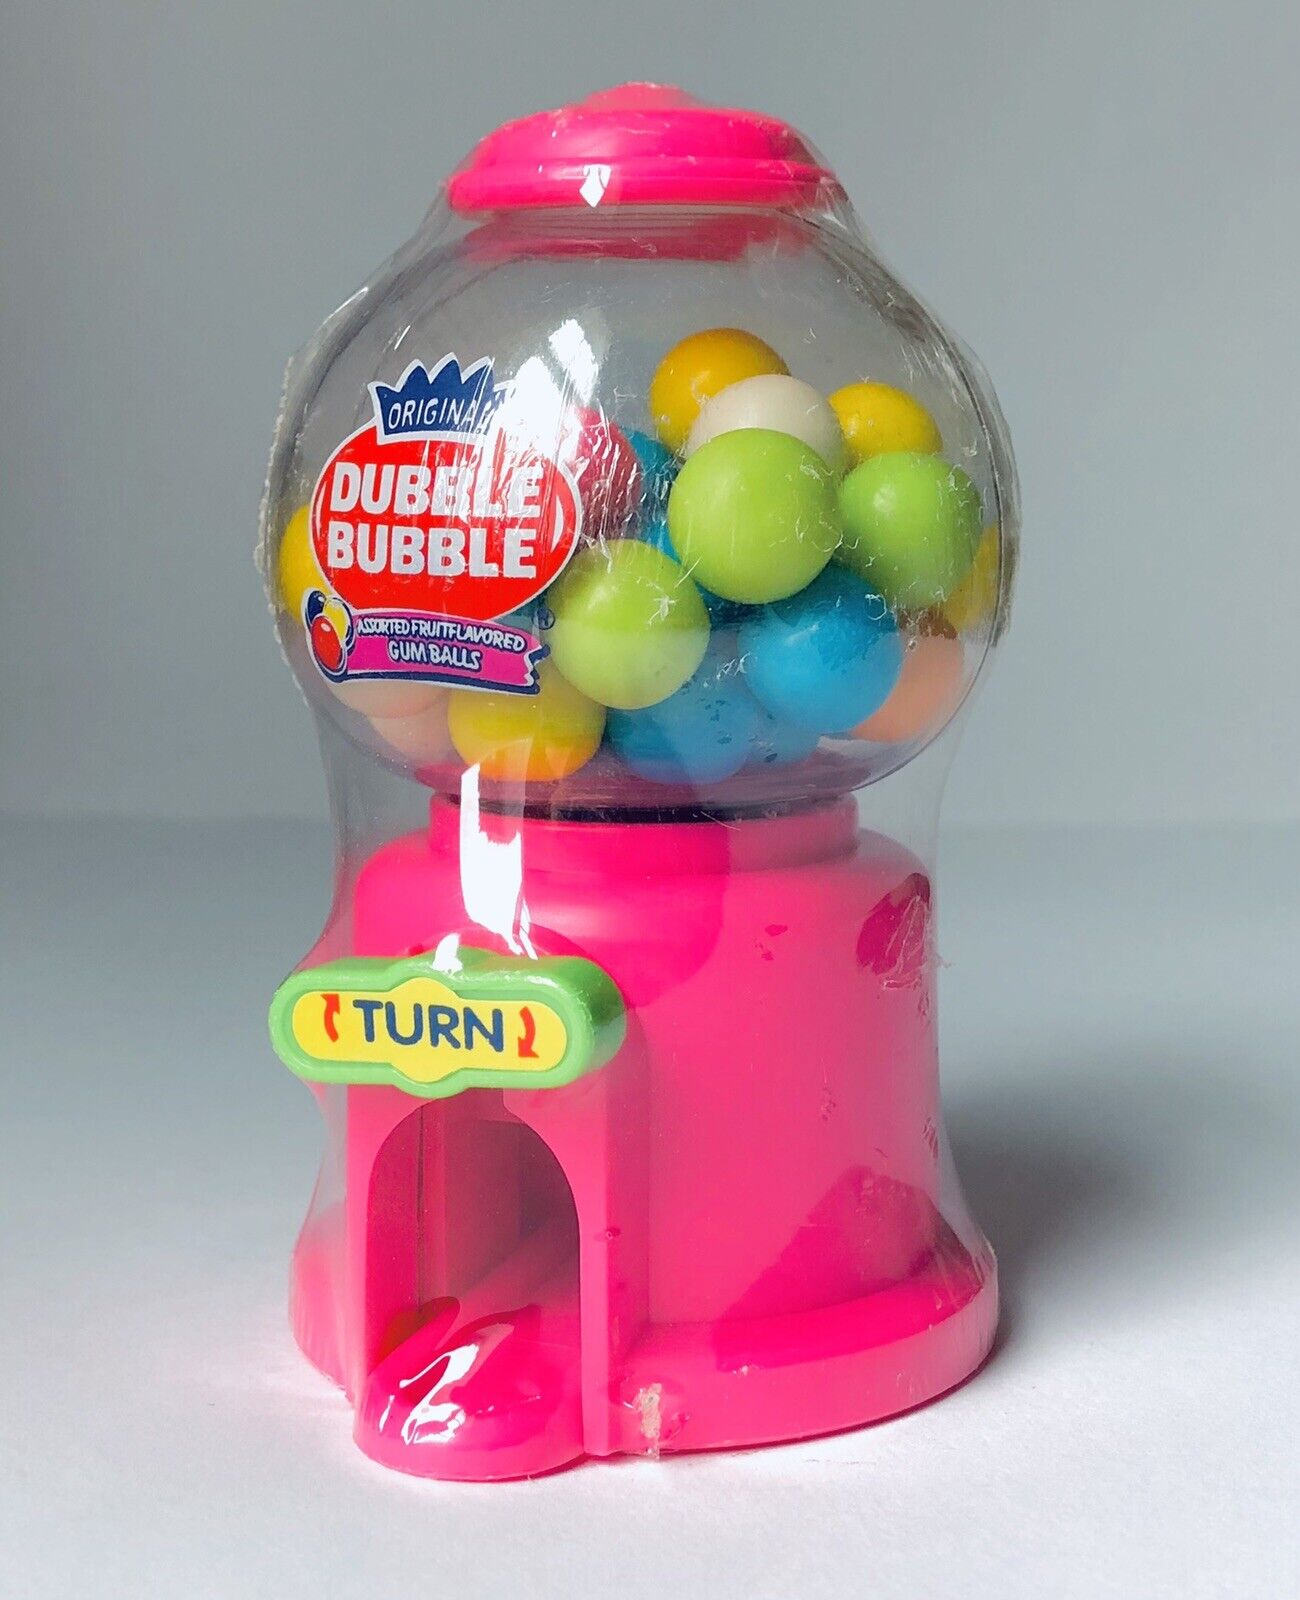 Vintage 2005 Kidsmania Hot Pink MINI GUMBALL MACHINE Container DOUBLE BUBBLE 5”